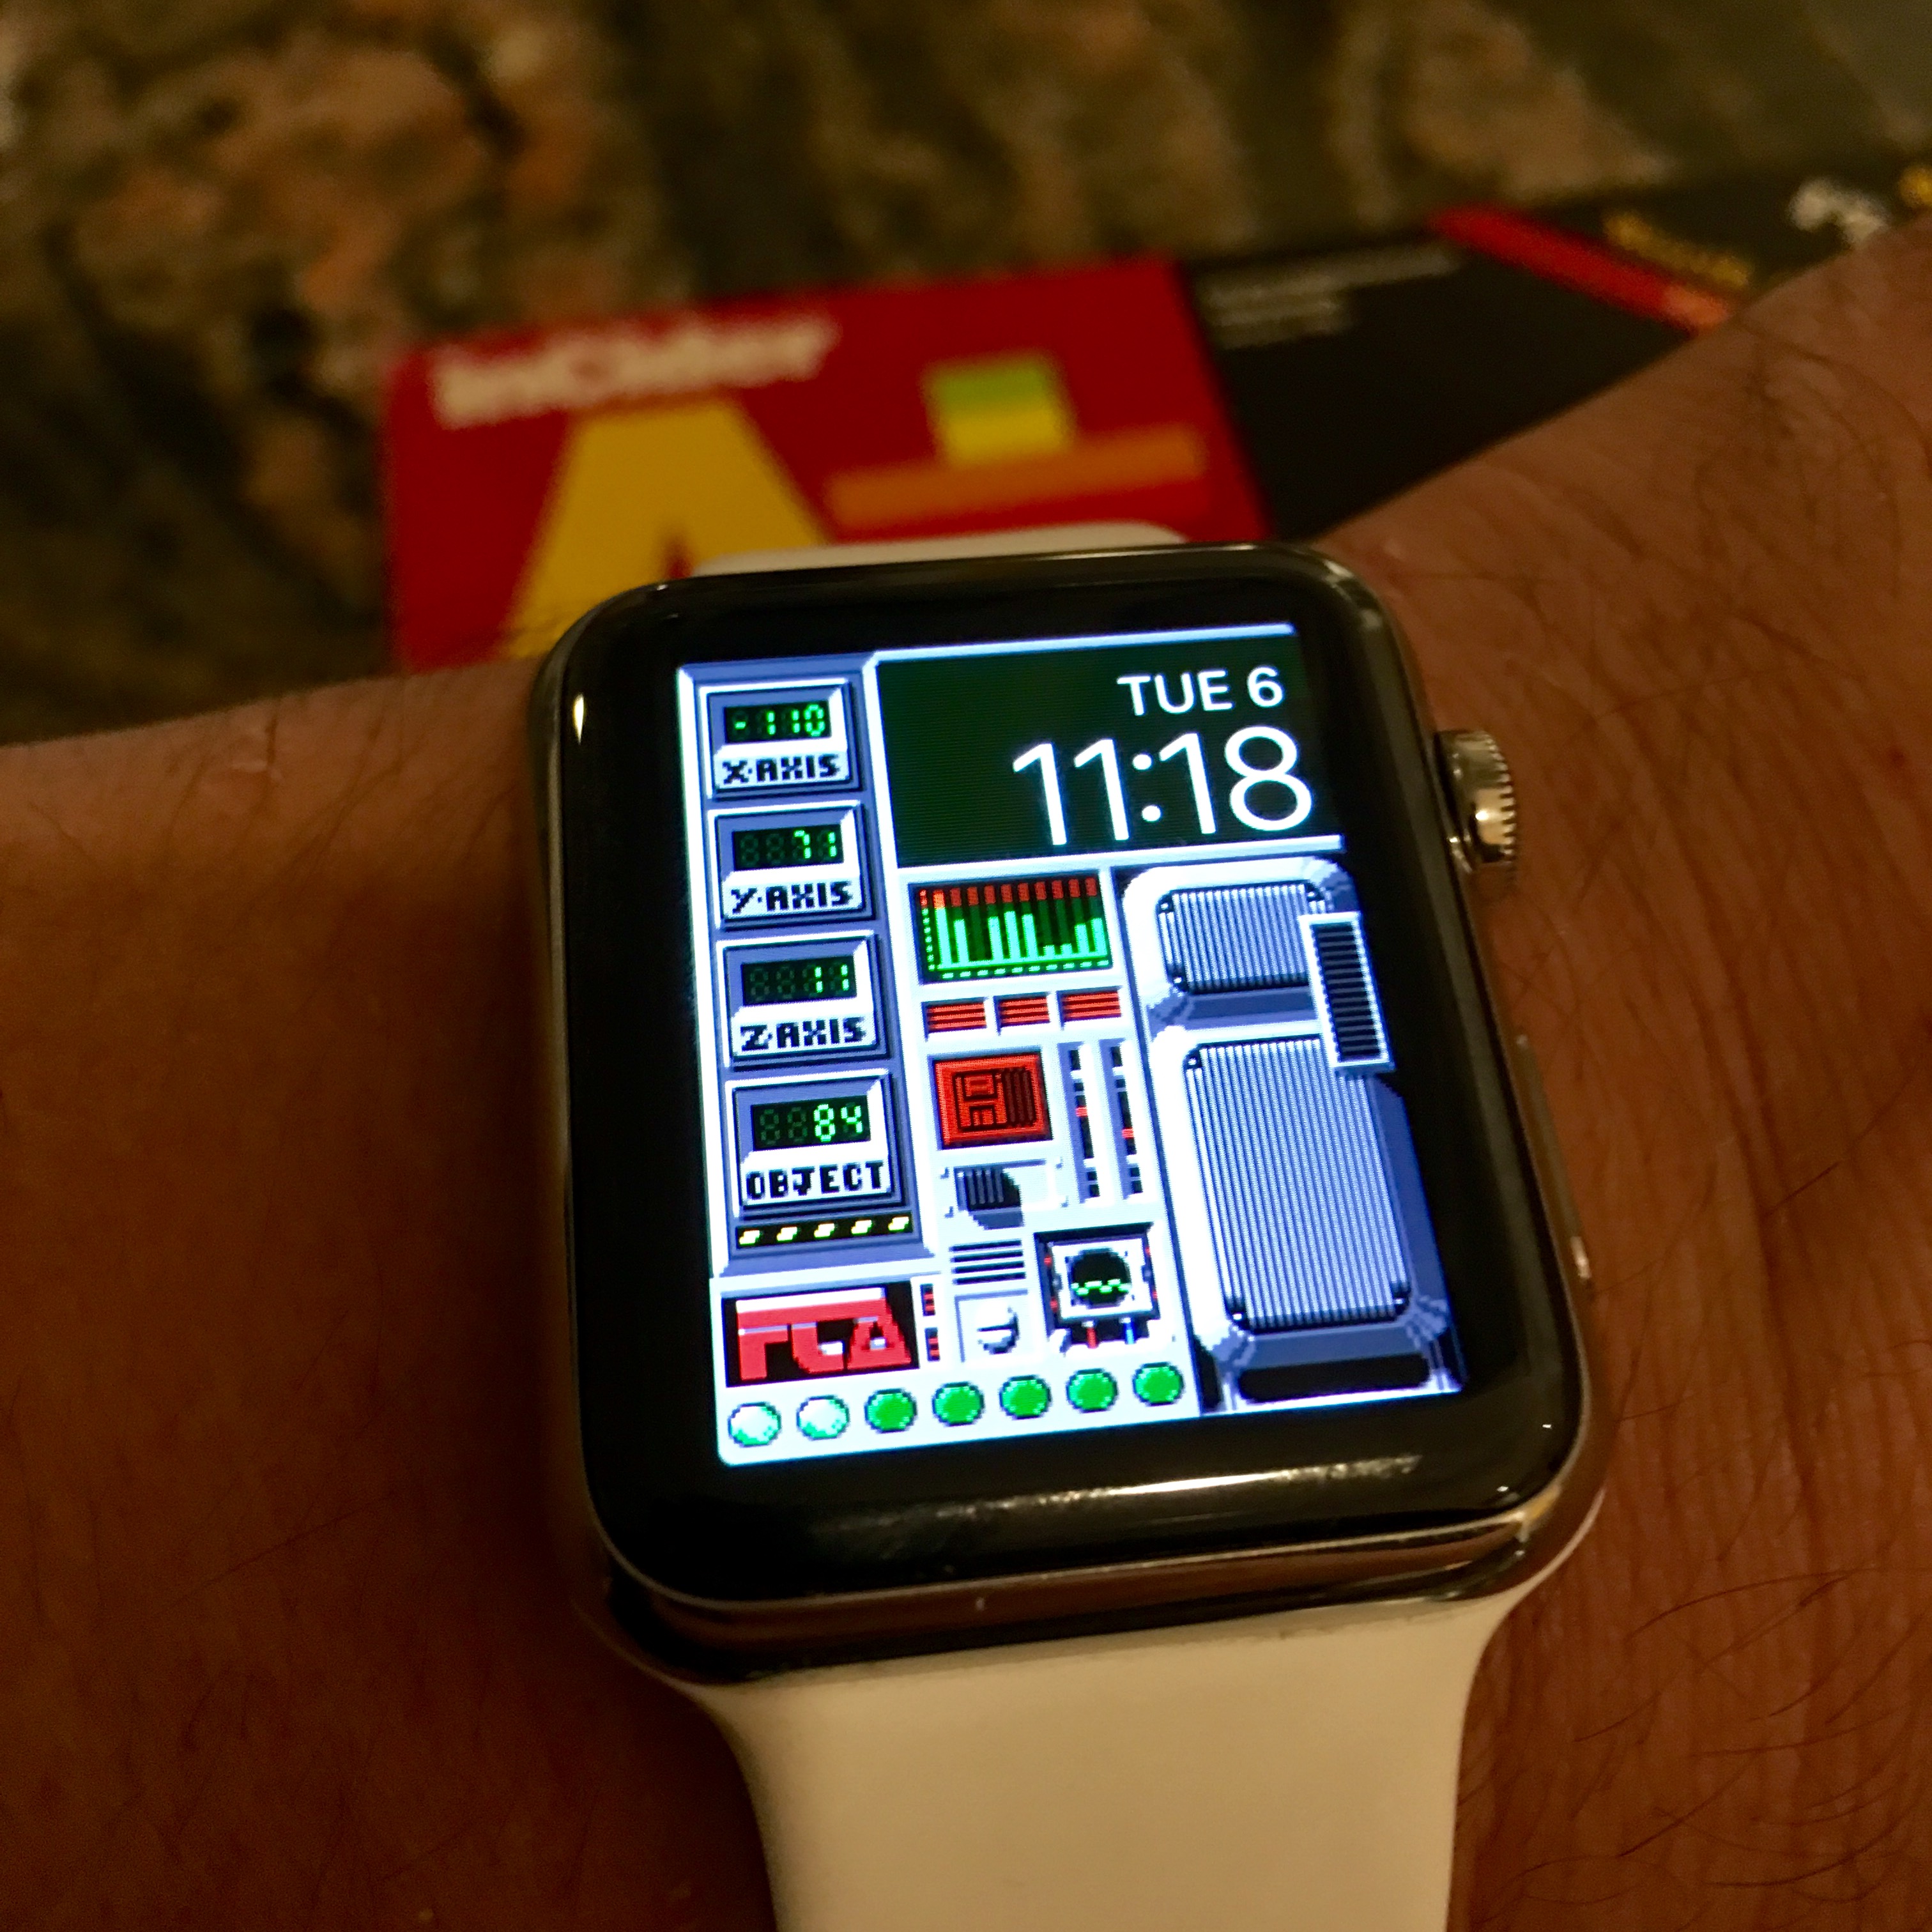 Post custom watch faces for Apple Watch [Merged] | Page 11 | MacRumors